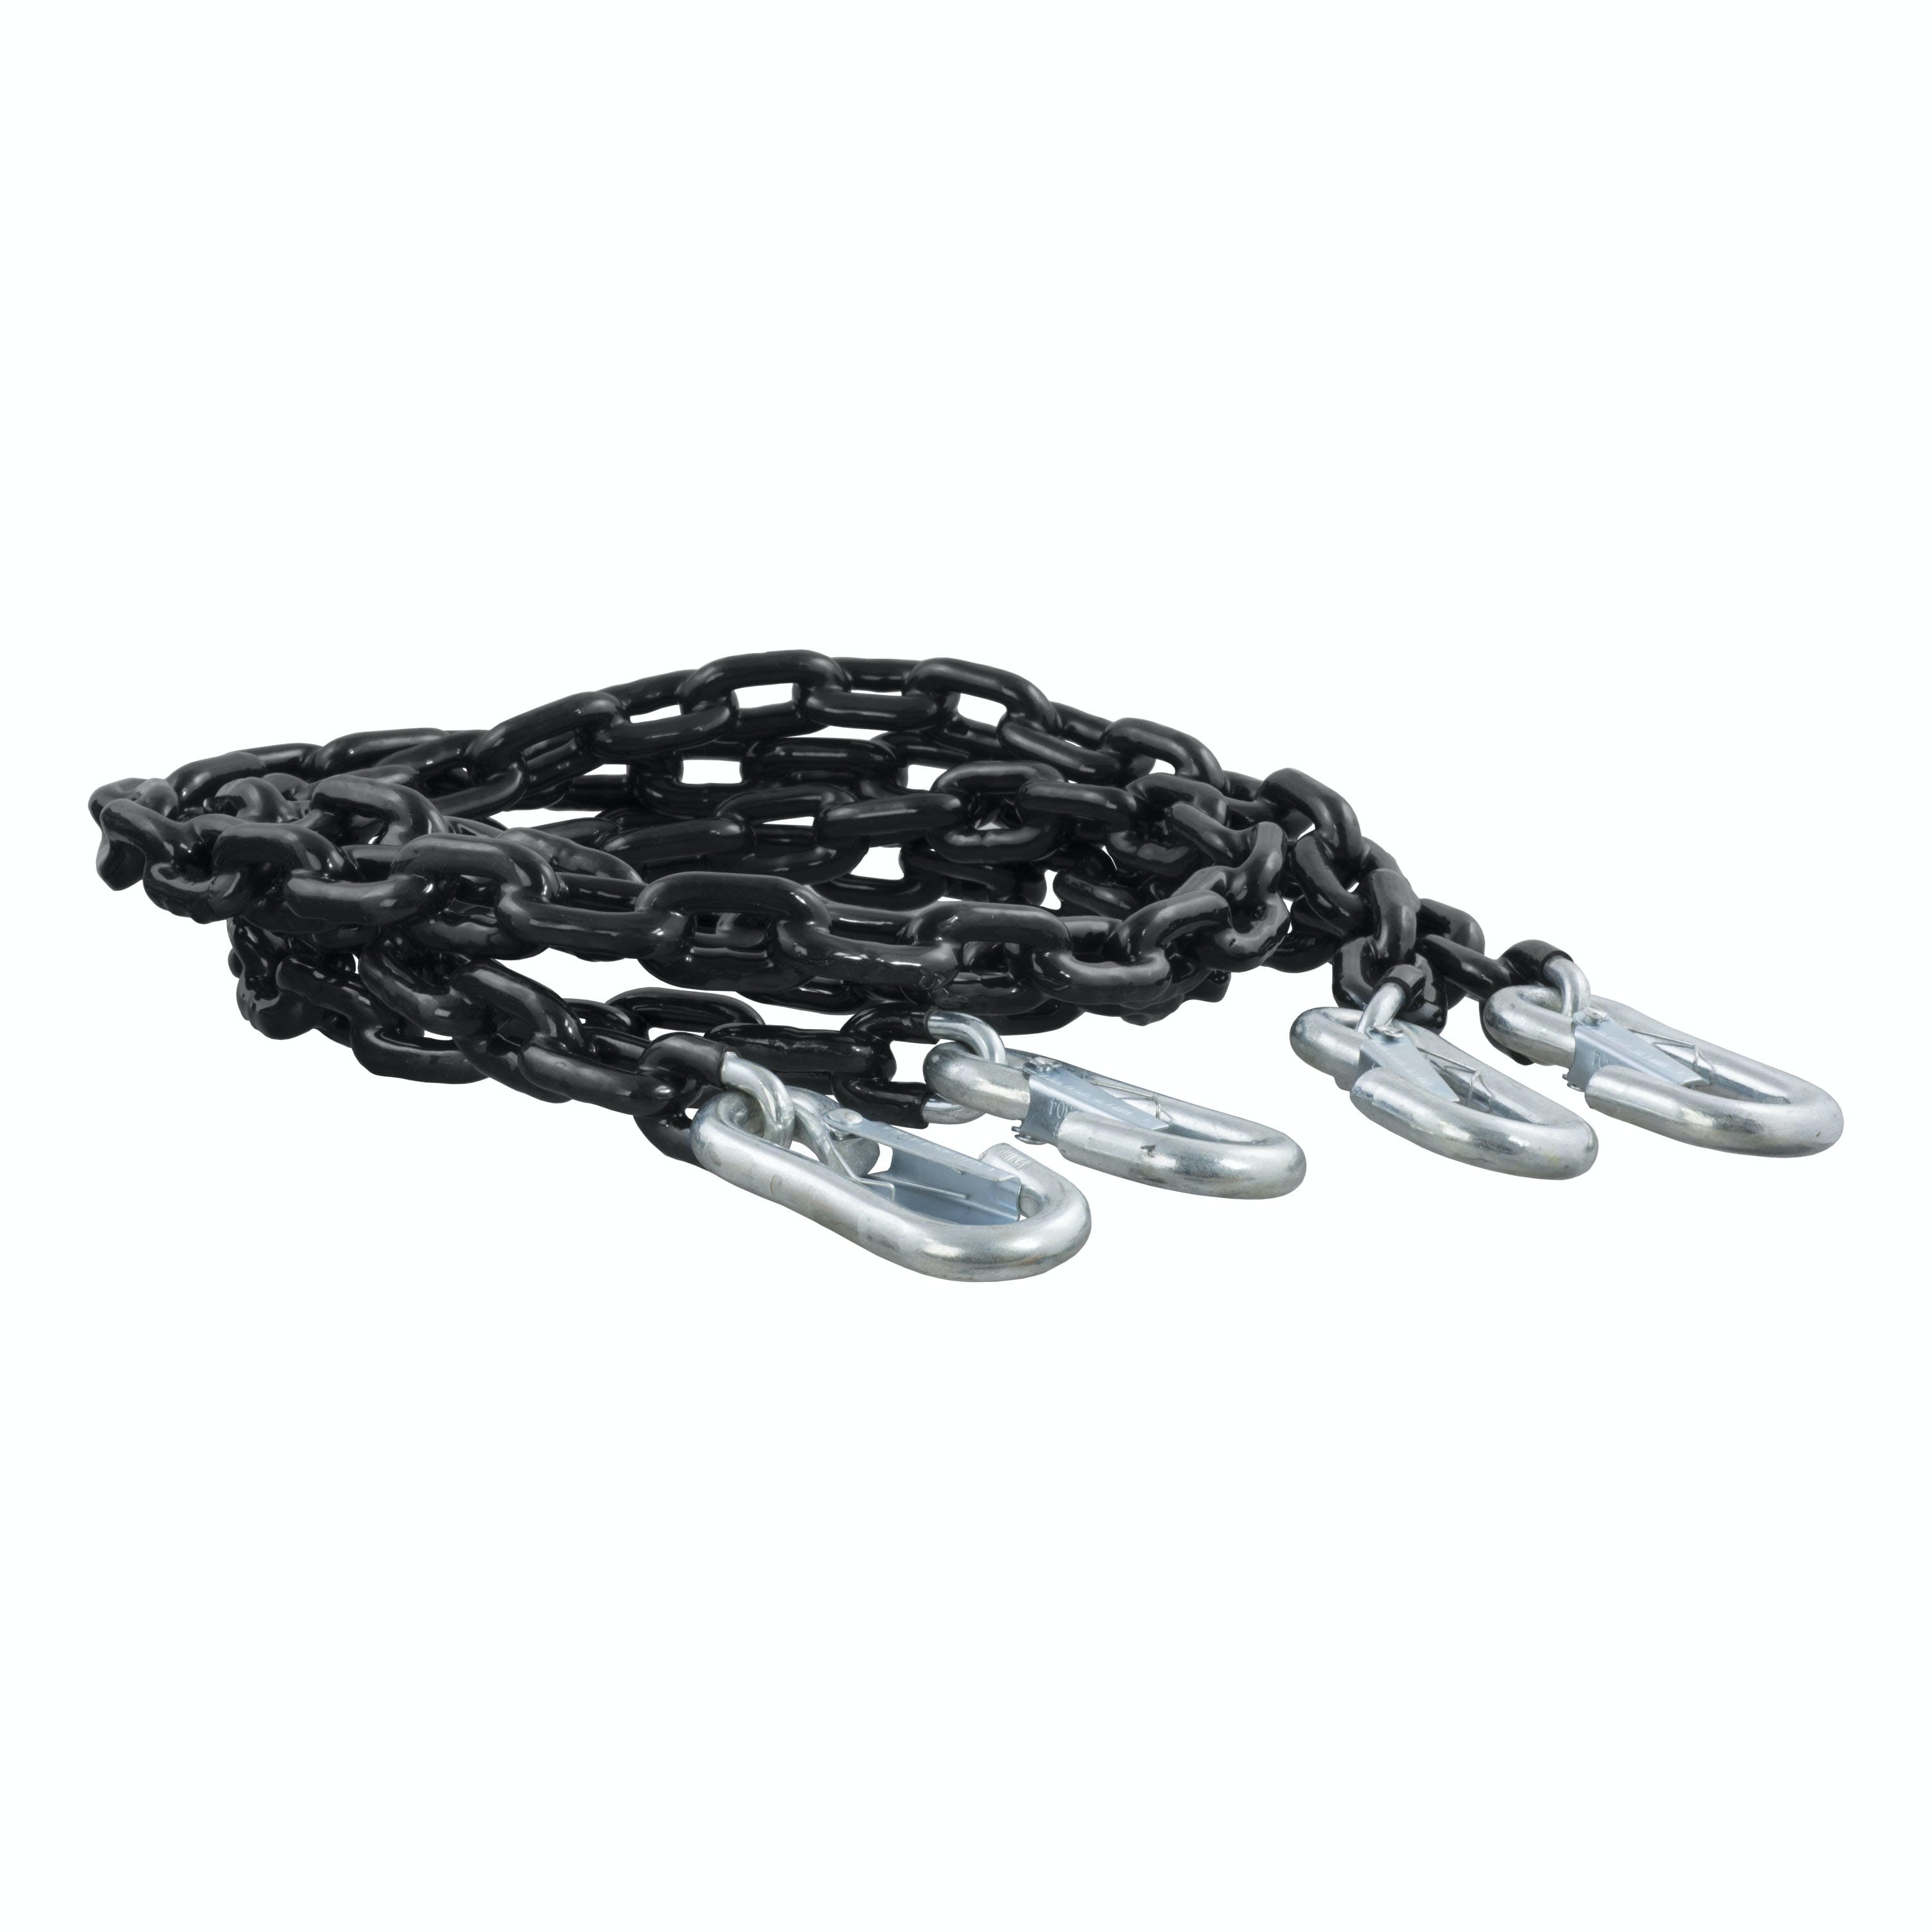 CURT 19749 65 Safety Chains with 2 Snap Hooks Each (5,000 lbs, Vinyl-Coated, 2-Pack)